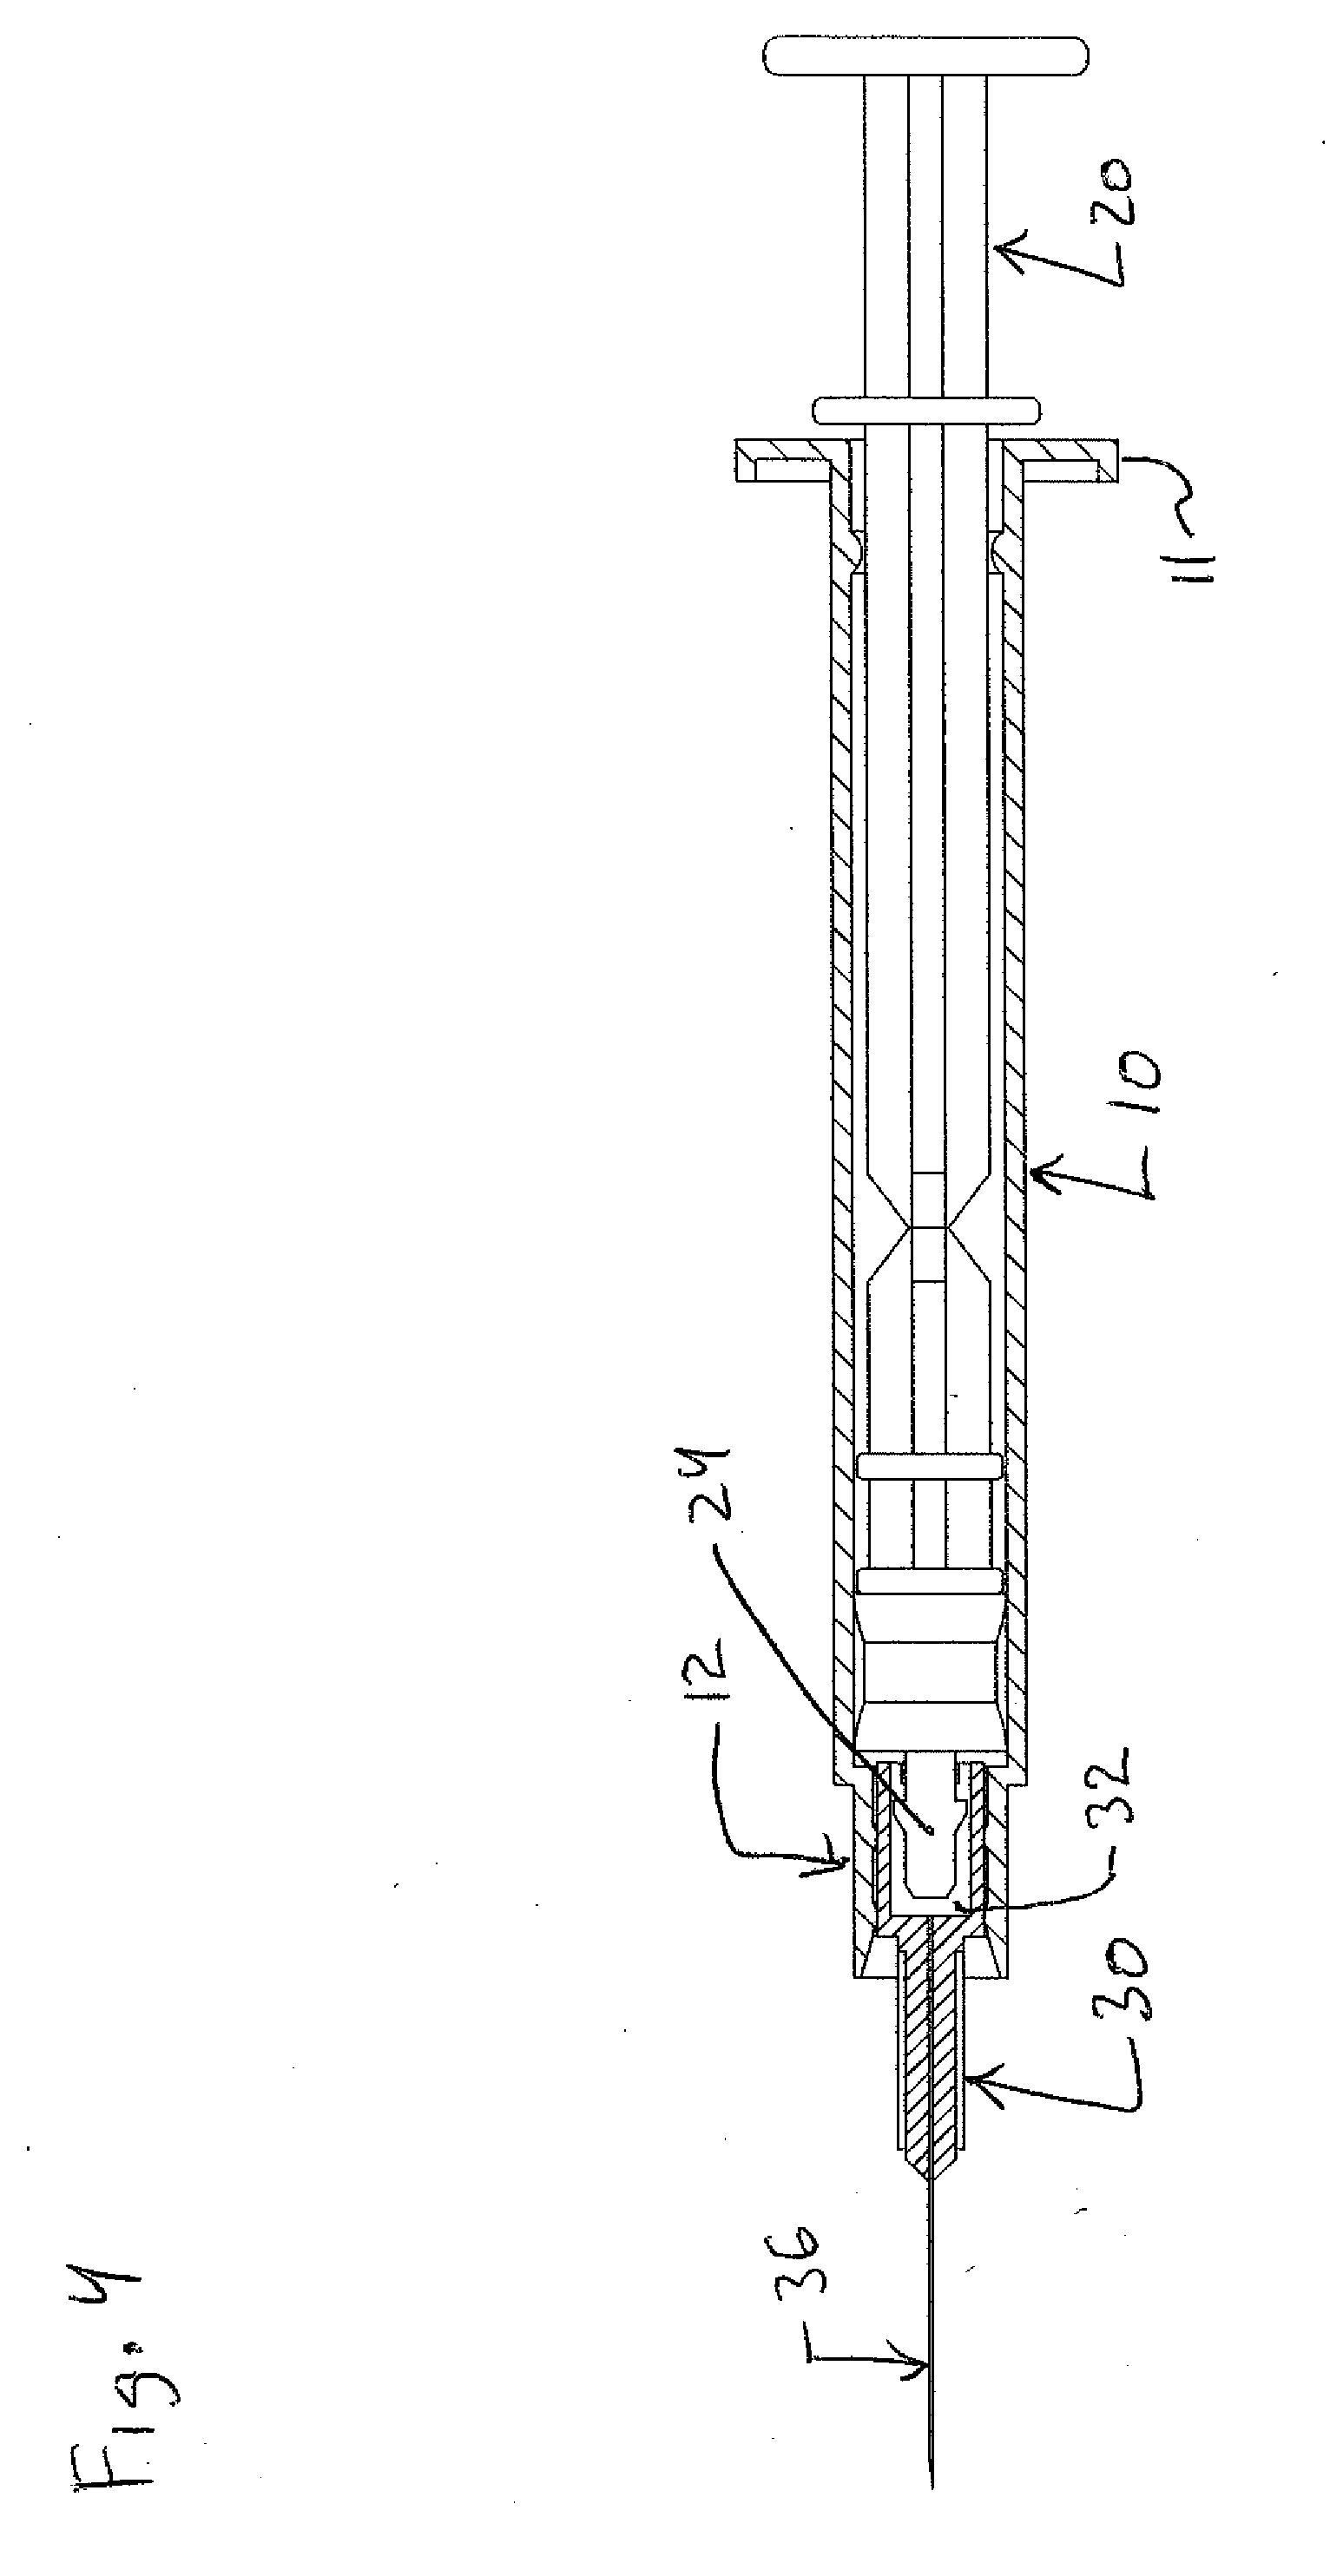 Syringe with retractable needle support